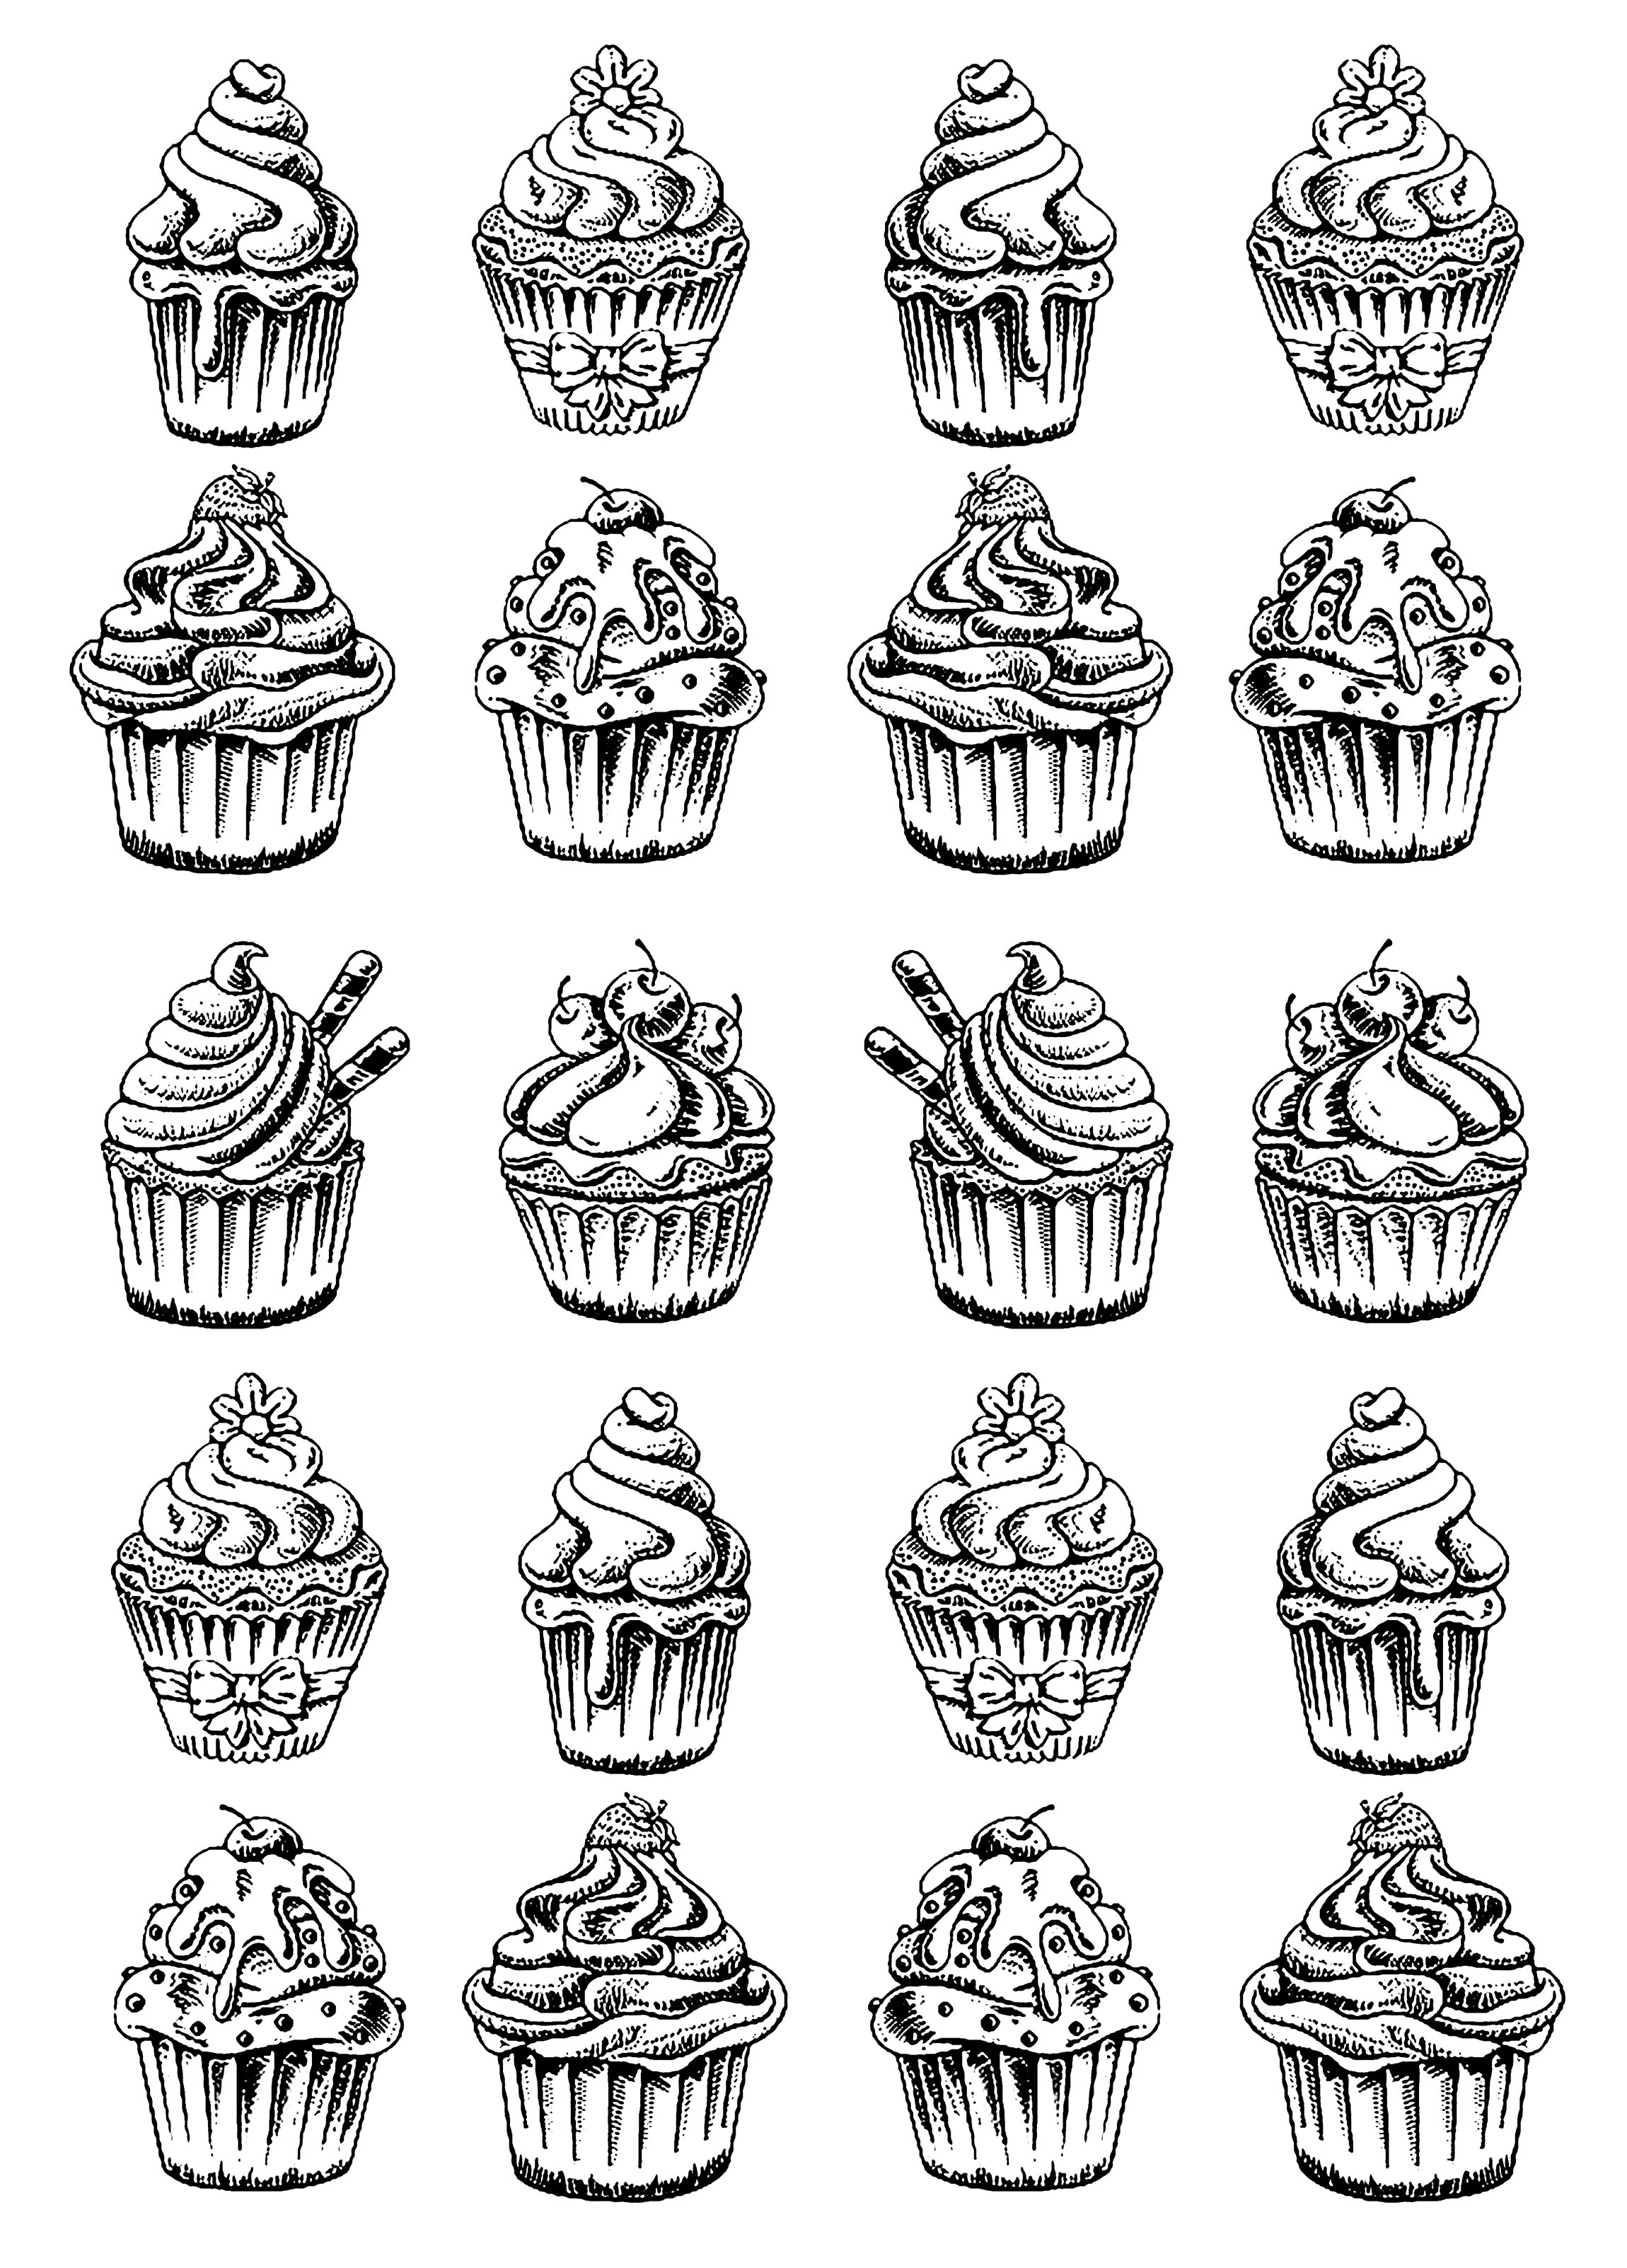 Twenty good cupcakes Cupcakes Adult Coloring Pages